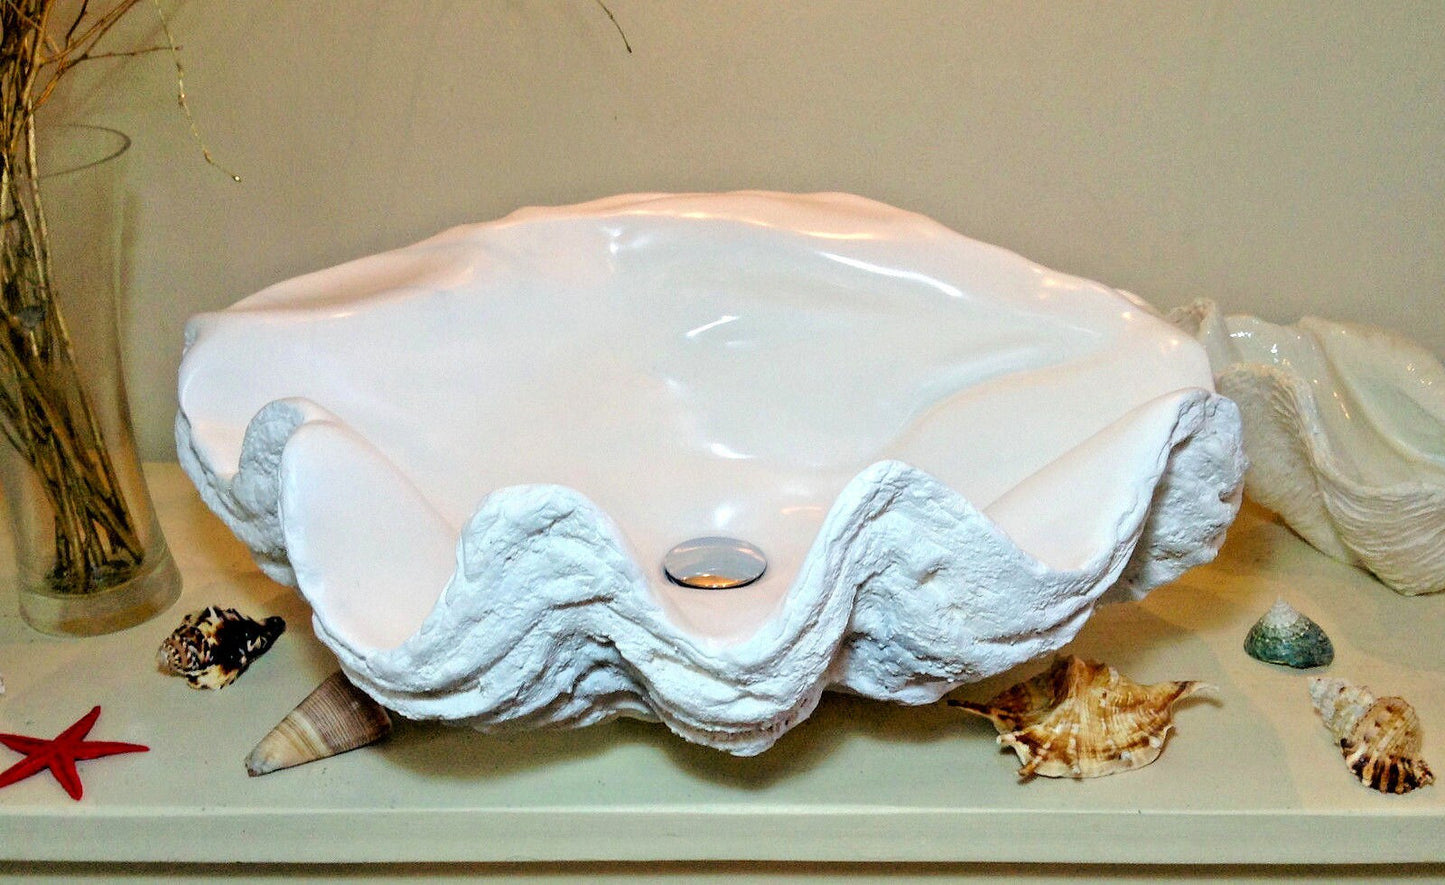 Medium Clam Shell Sink in Pure White